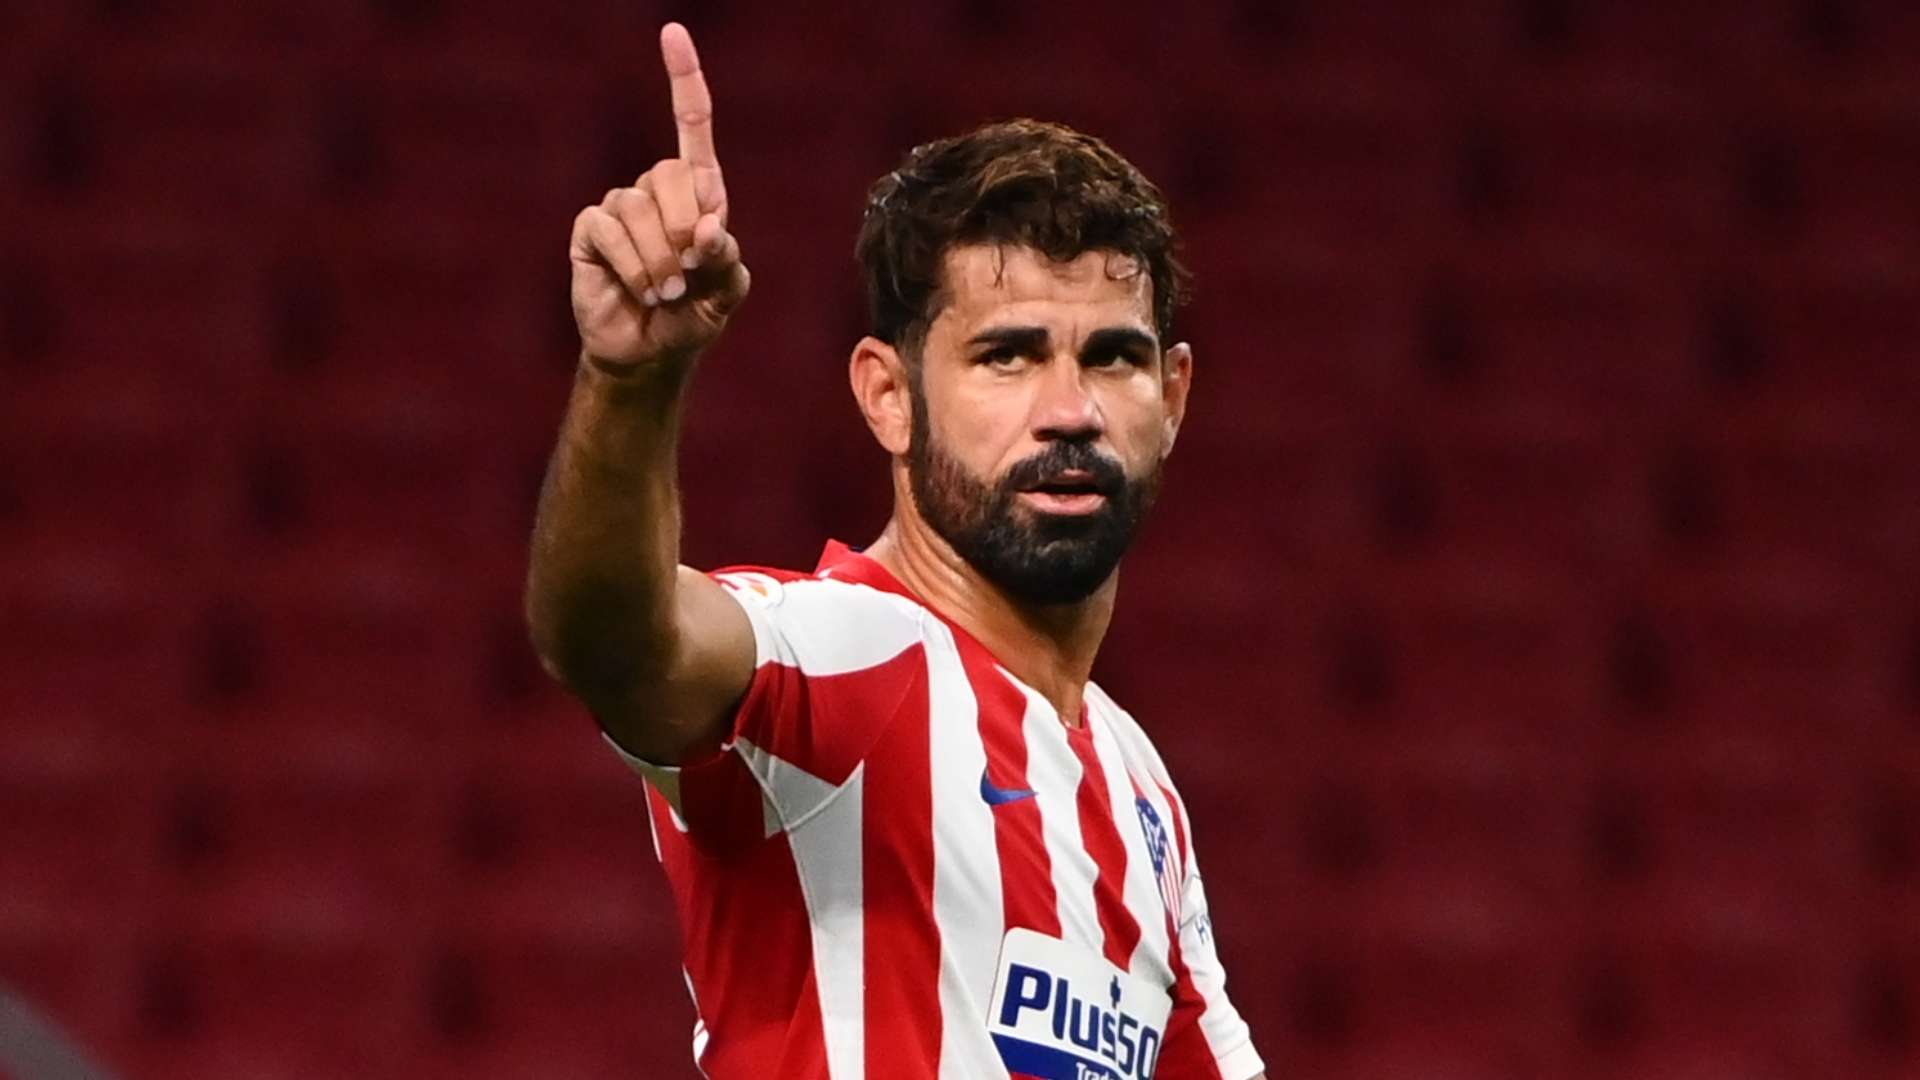 There is no negotiation with Diego Costa!' - Palmeiras manager